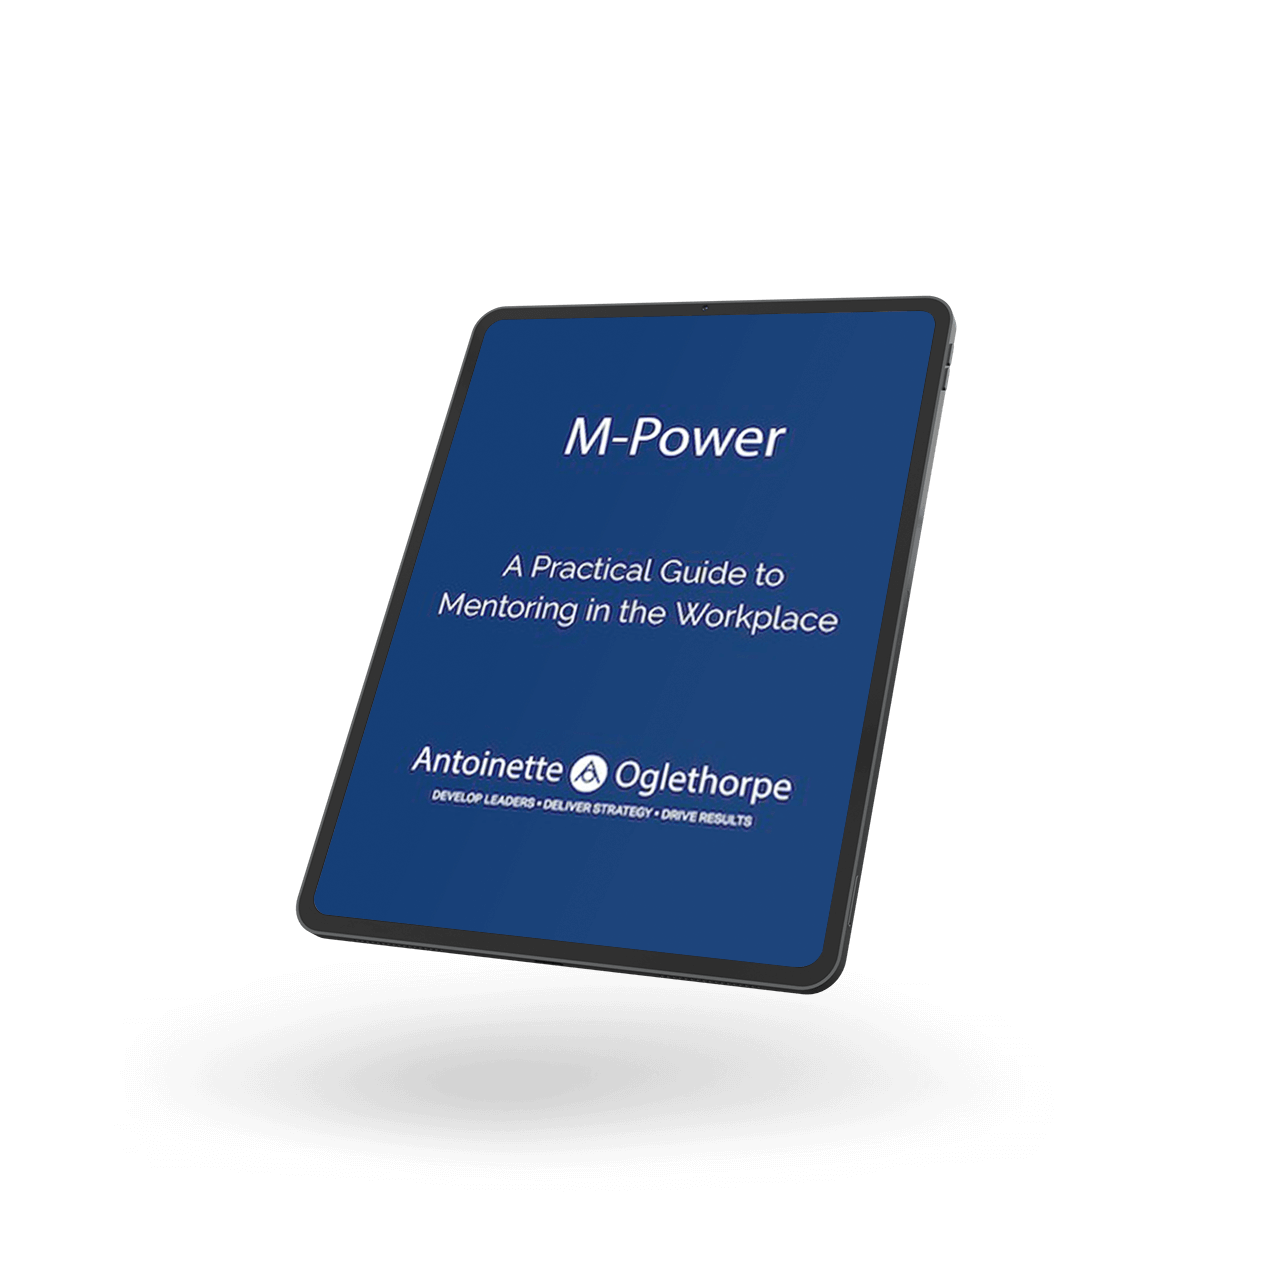 M-Power a practical guide to mentoring in the workplace eBook Mockup Antoinette Oglethorpe